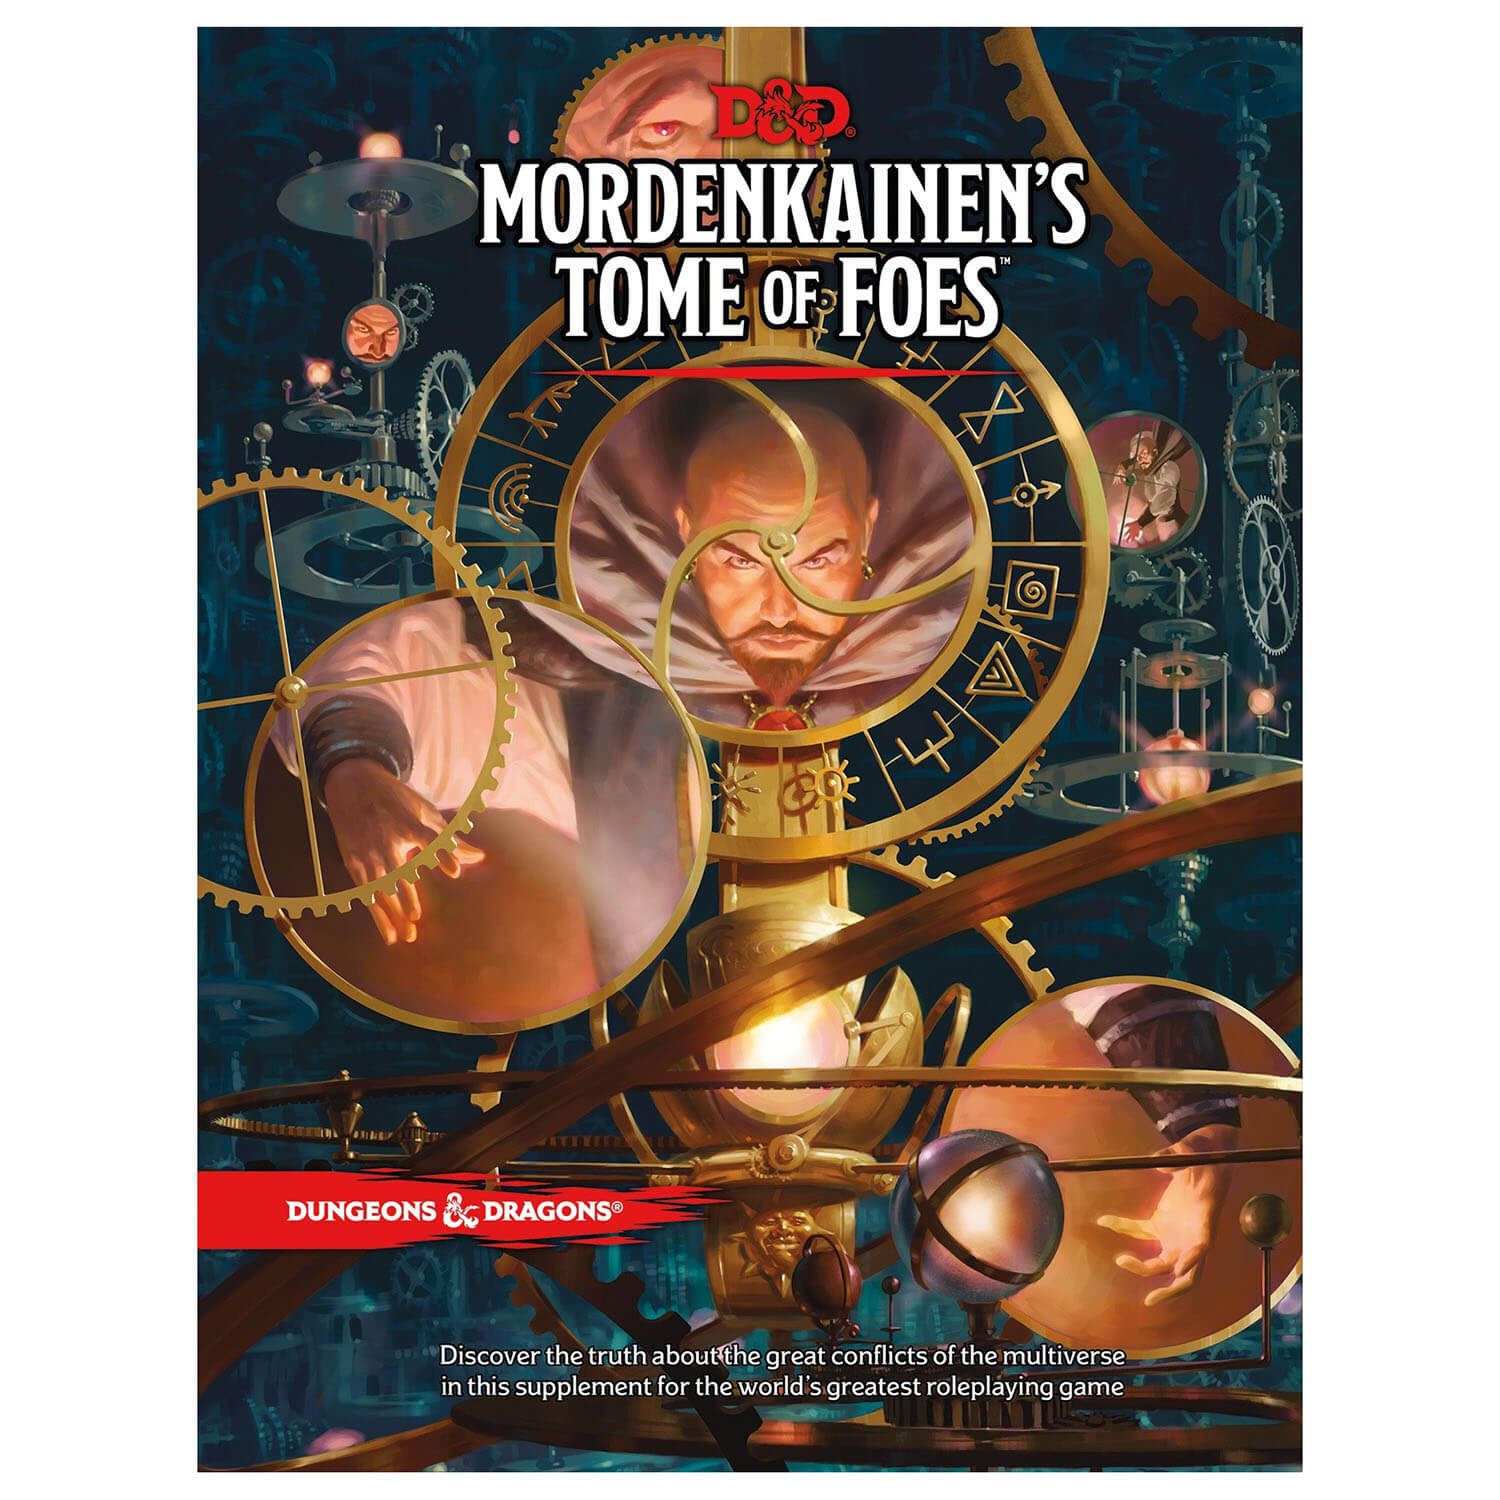 Dungeons & Dragons Mordenkainen's Tome of Foes Hardcover